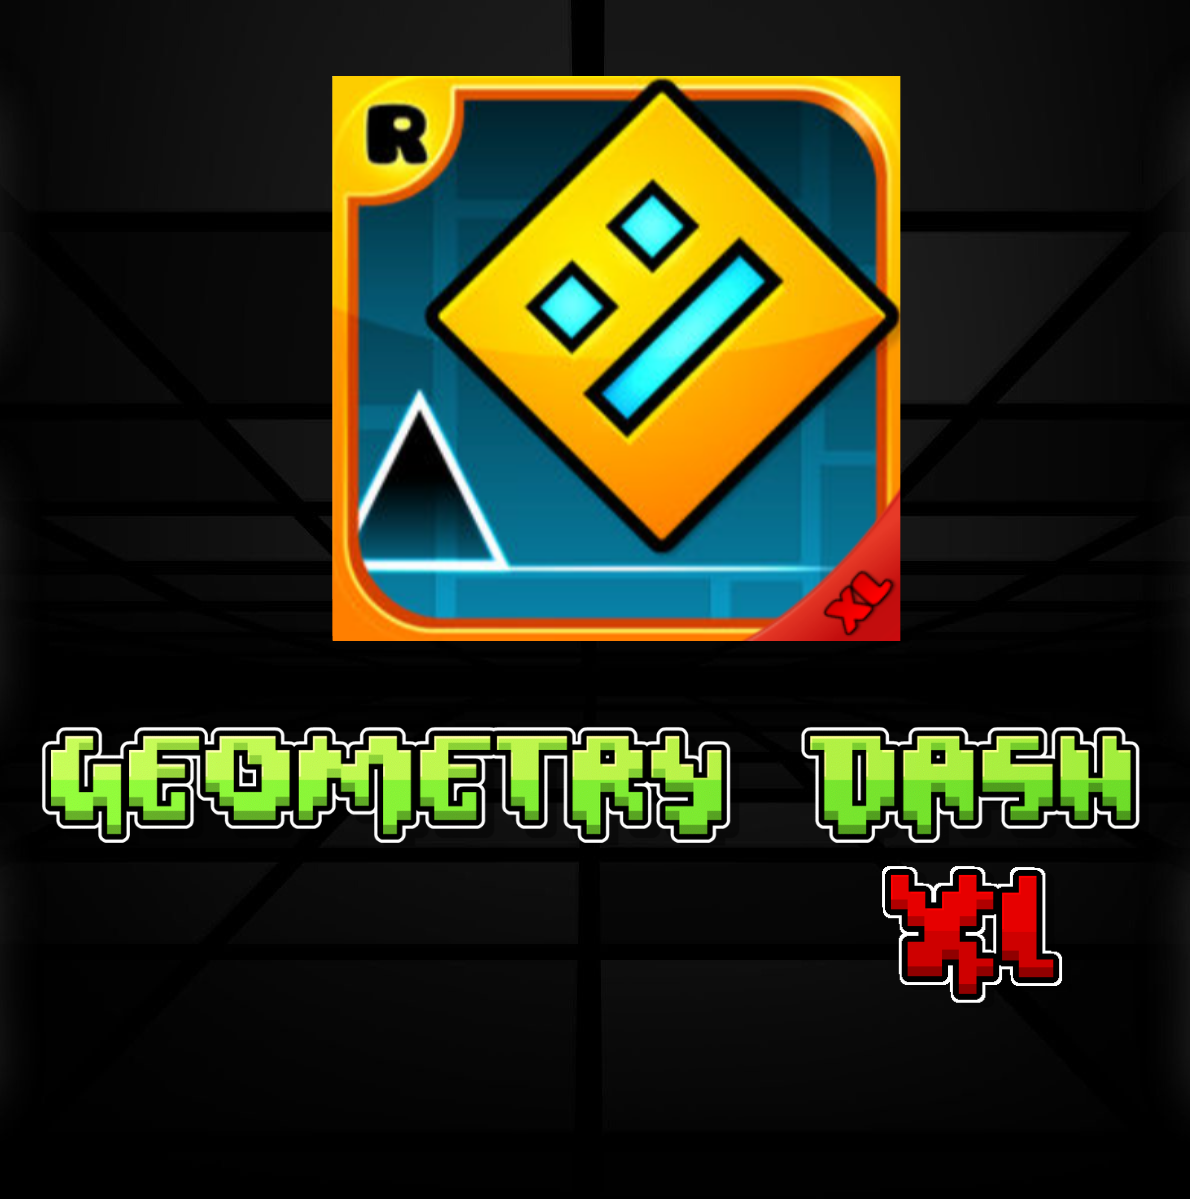 https://static.wikia.nocookie.net/geometry-dash-fan-ideas/images/3/38/Geometry_Dash_XL.png/revision/latest?cb=20220324230349